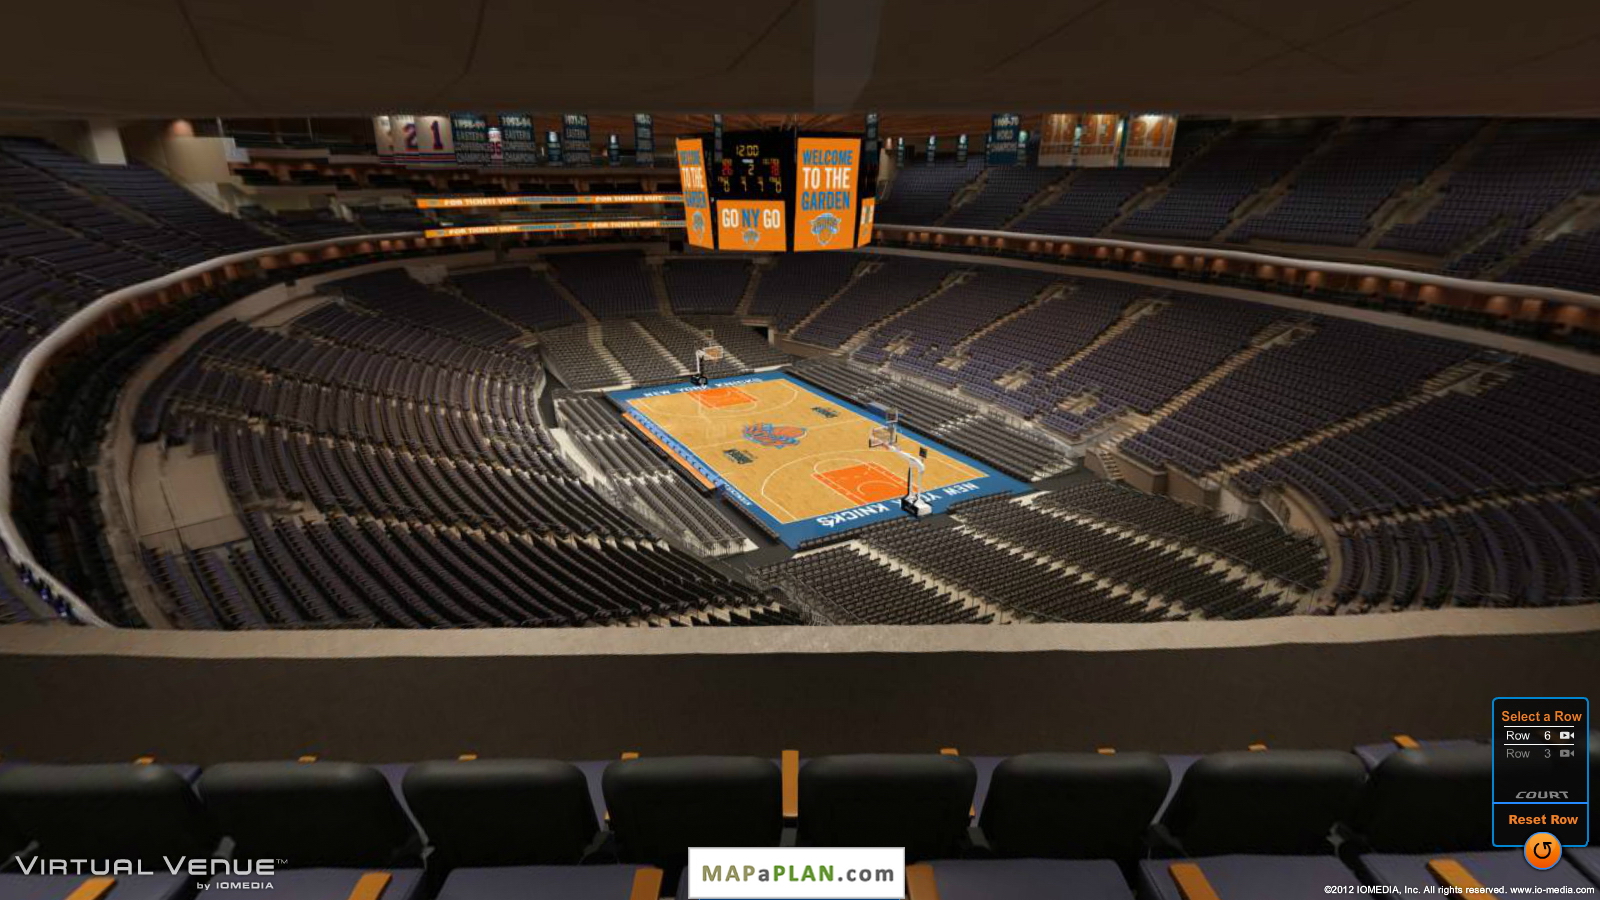 Madison square garden seating chart View from section 414